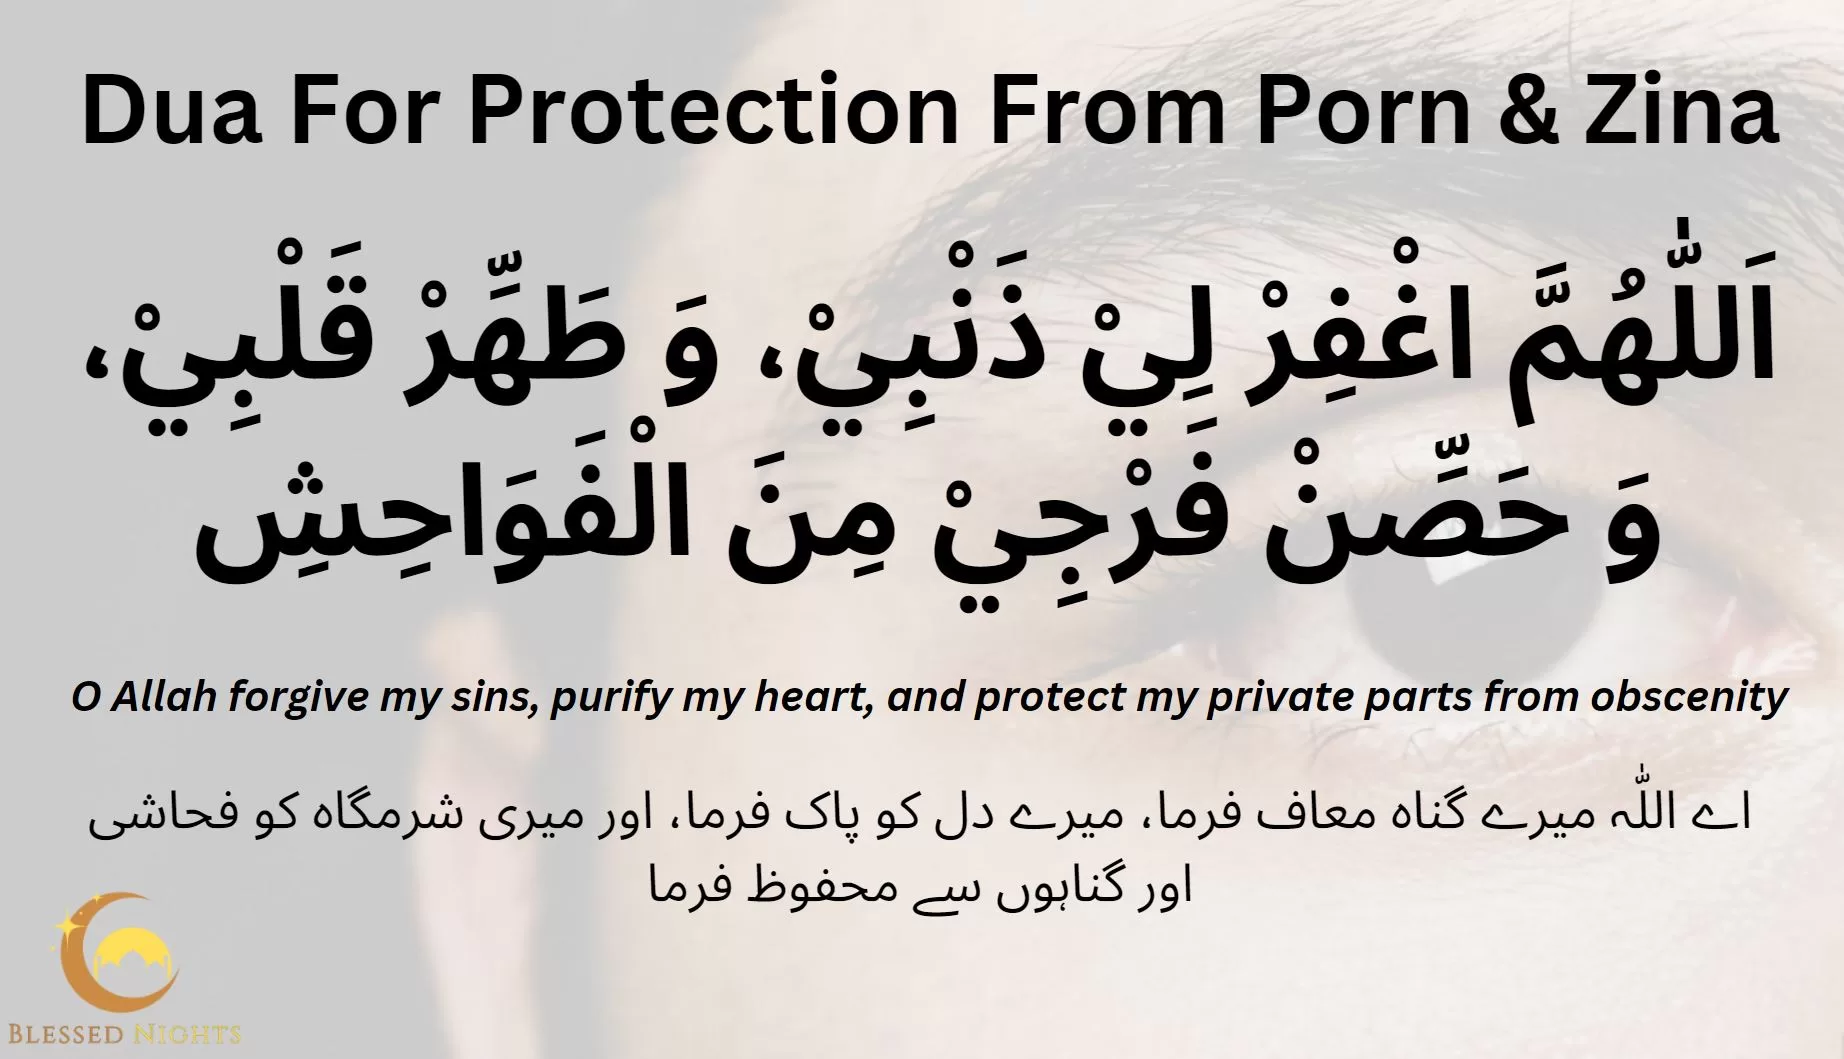 Dua To Stop Porn Addiction And Seek Protection From Zina